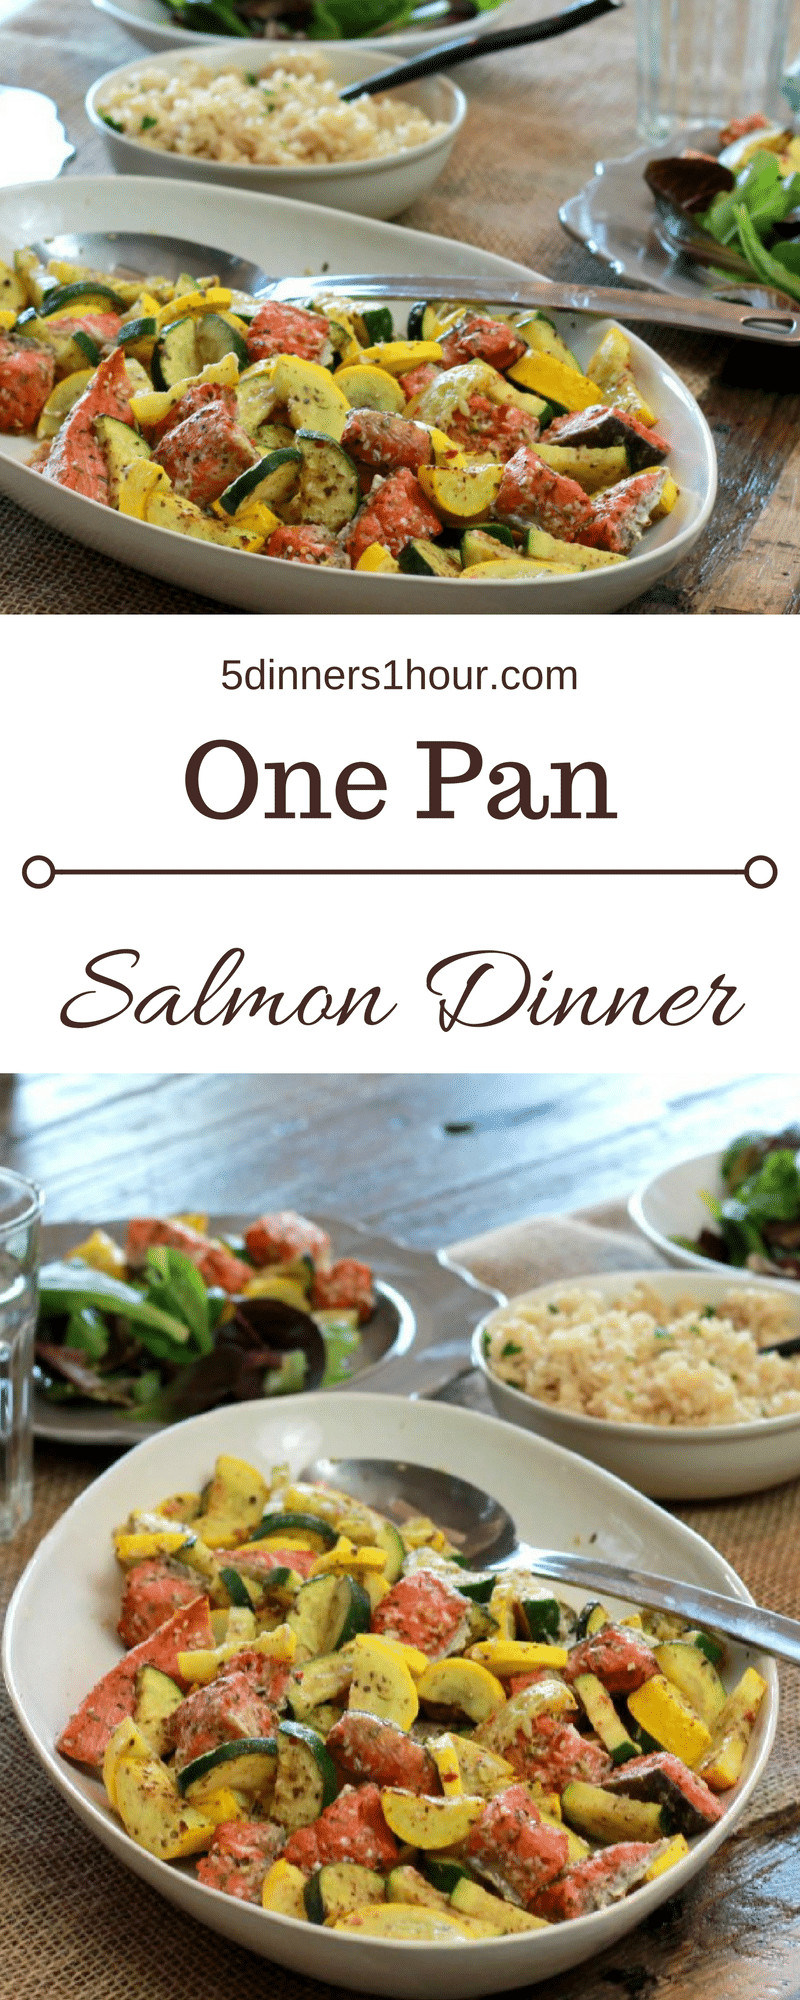 5 Dinners 1 Hour
 5 Minute Quick Salmon Dinner 5 Dinners In 1 Hour